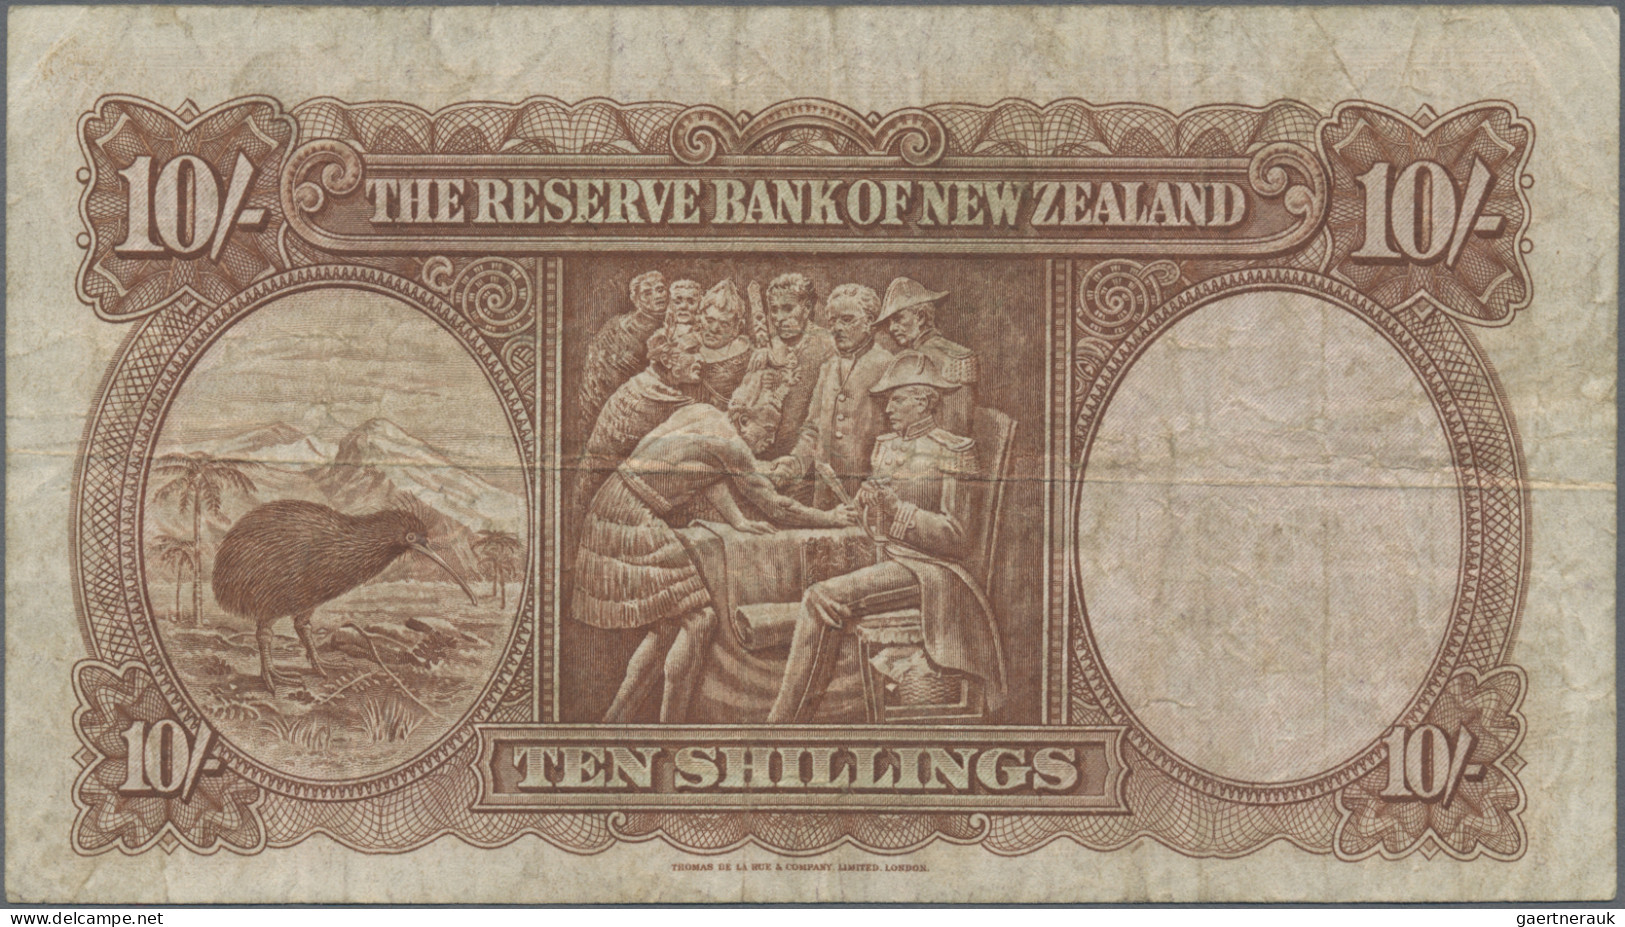 New Zealand: The Reserve Bank of New Zealand, lot with 4 banknotes, series ND(19